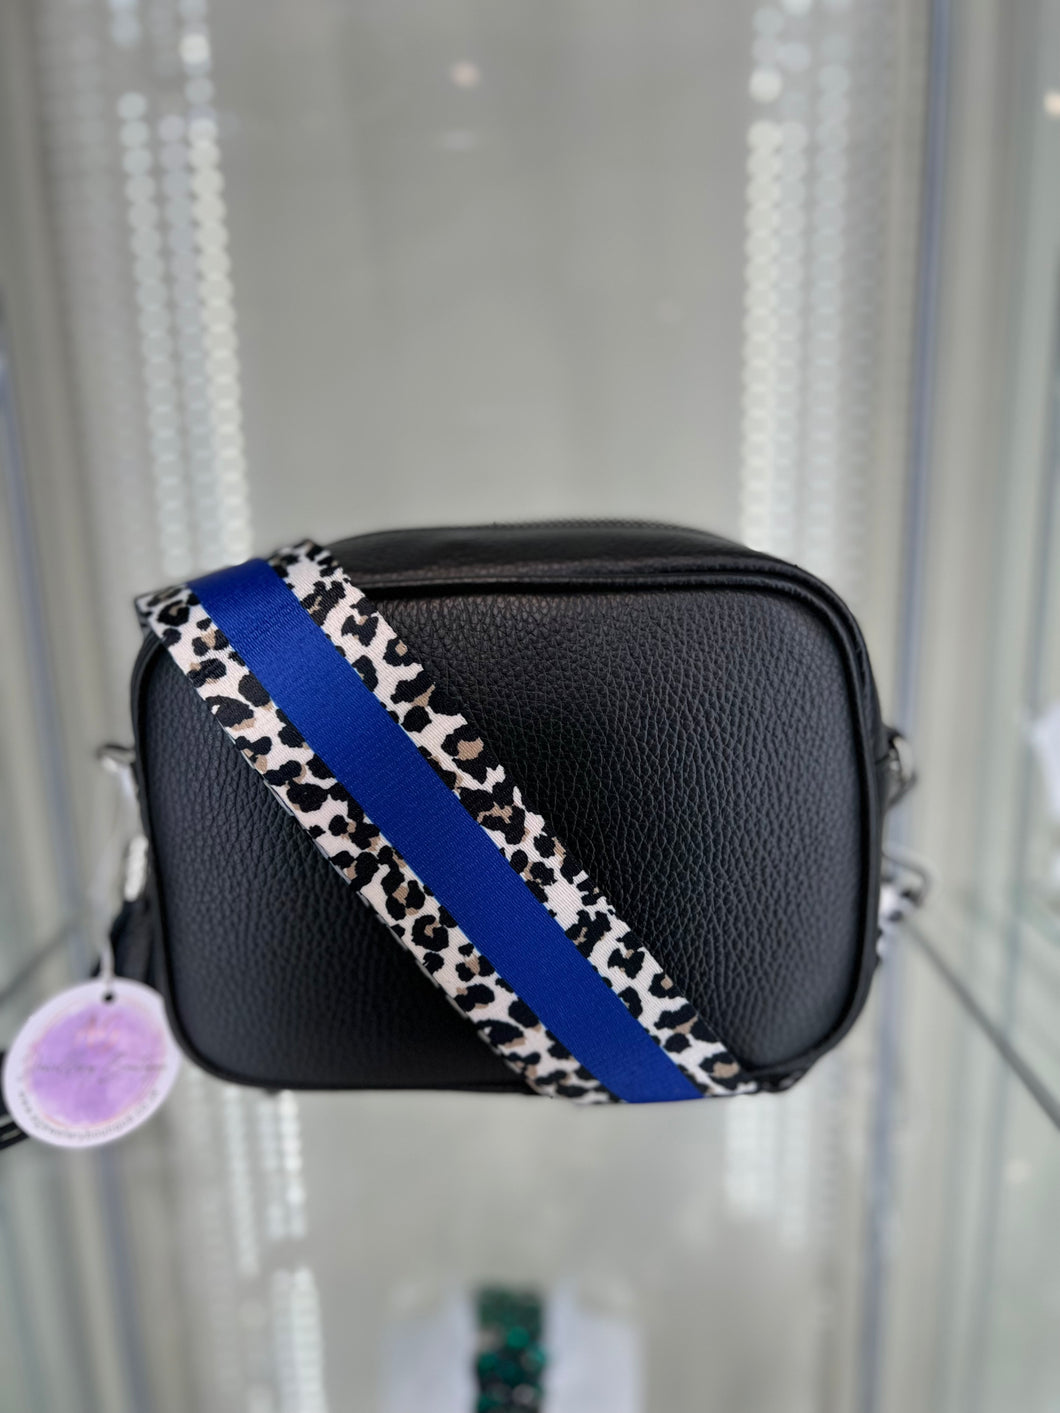 Real Leather Black Crossbody Bag with Royal Blue Striped